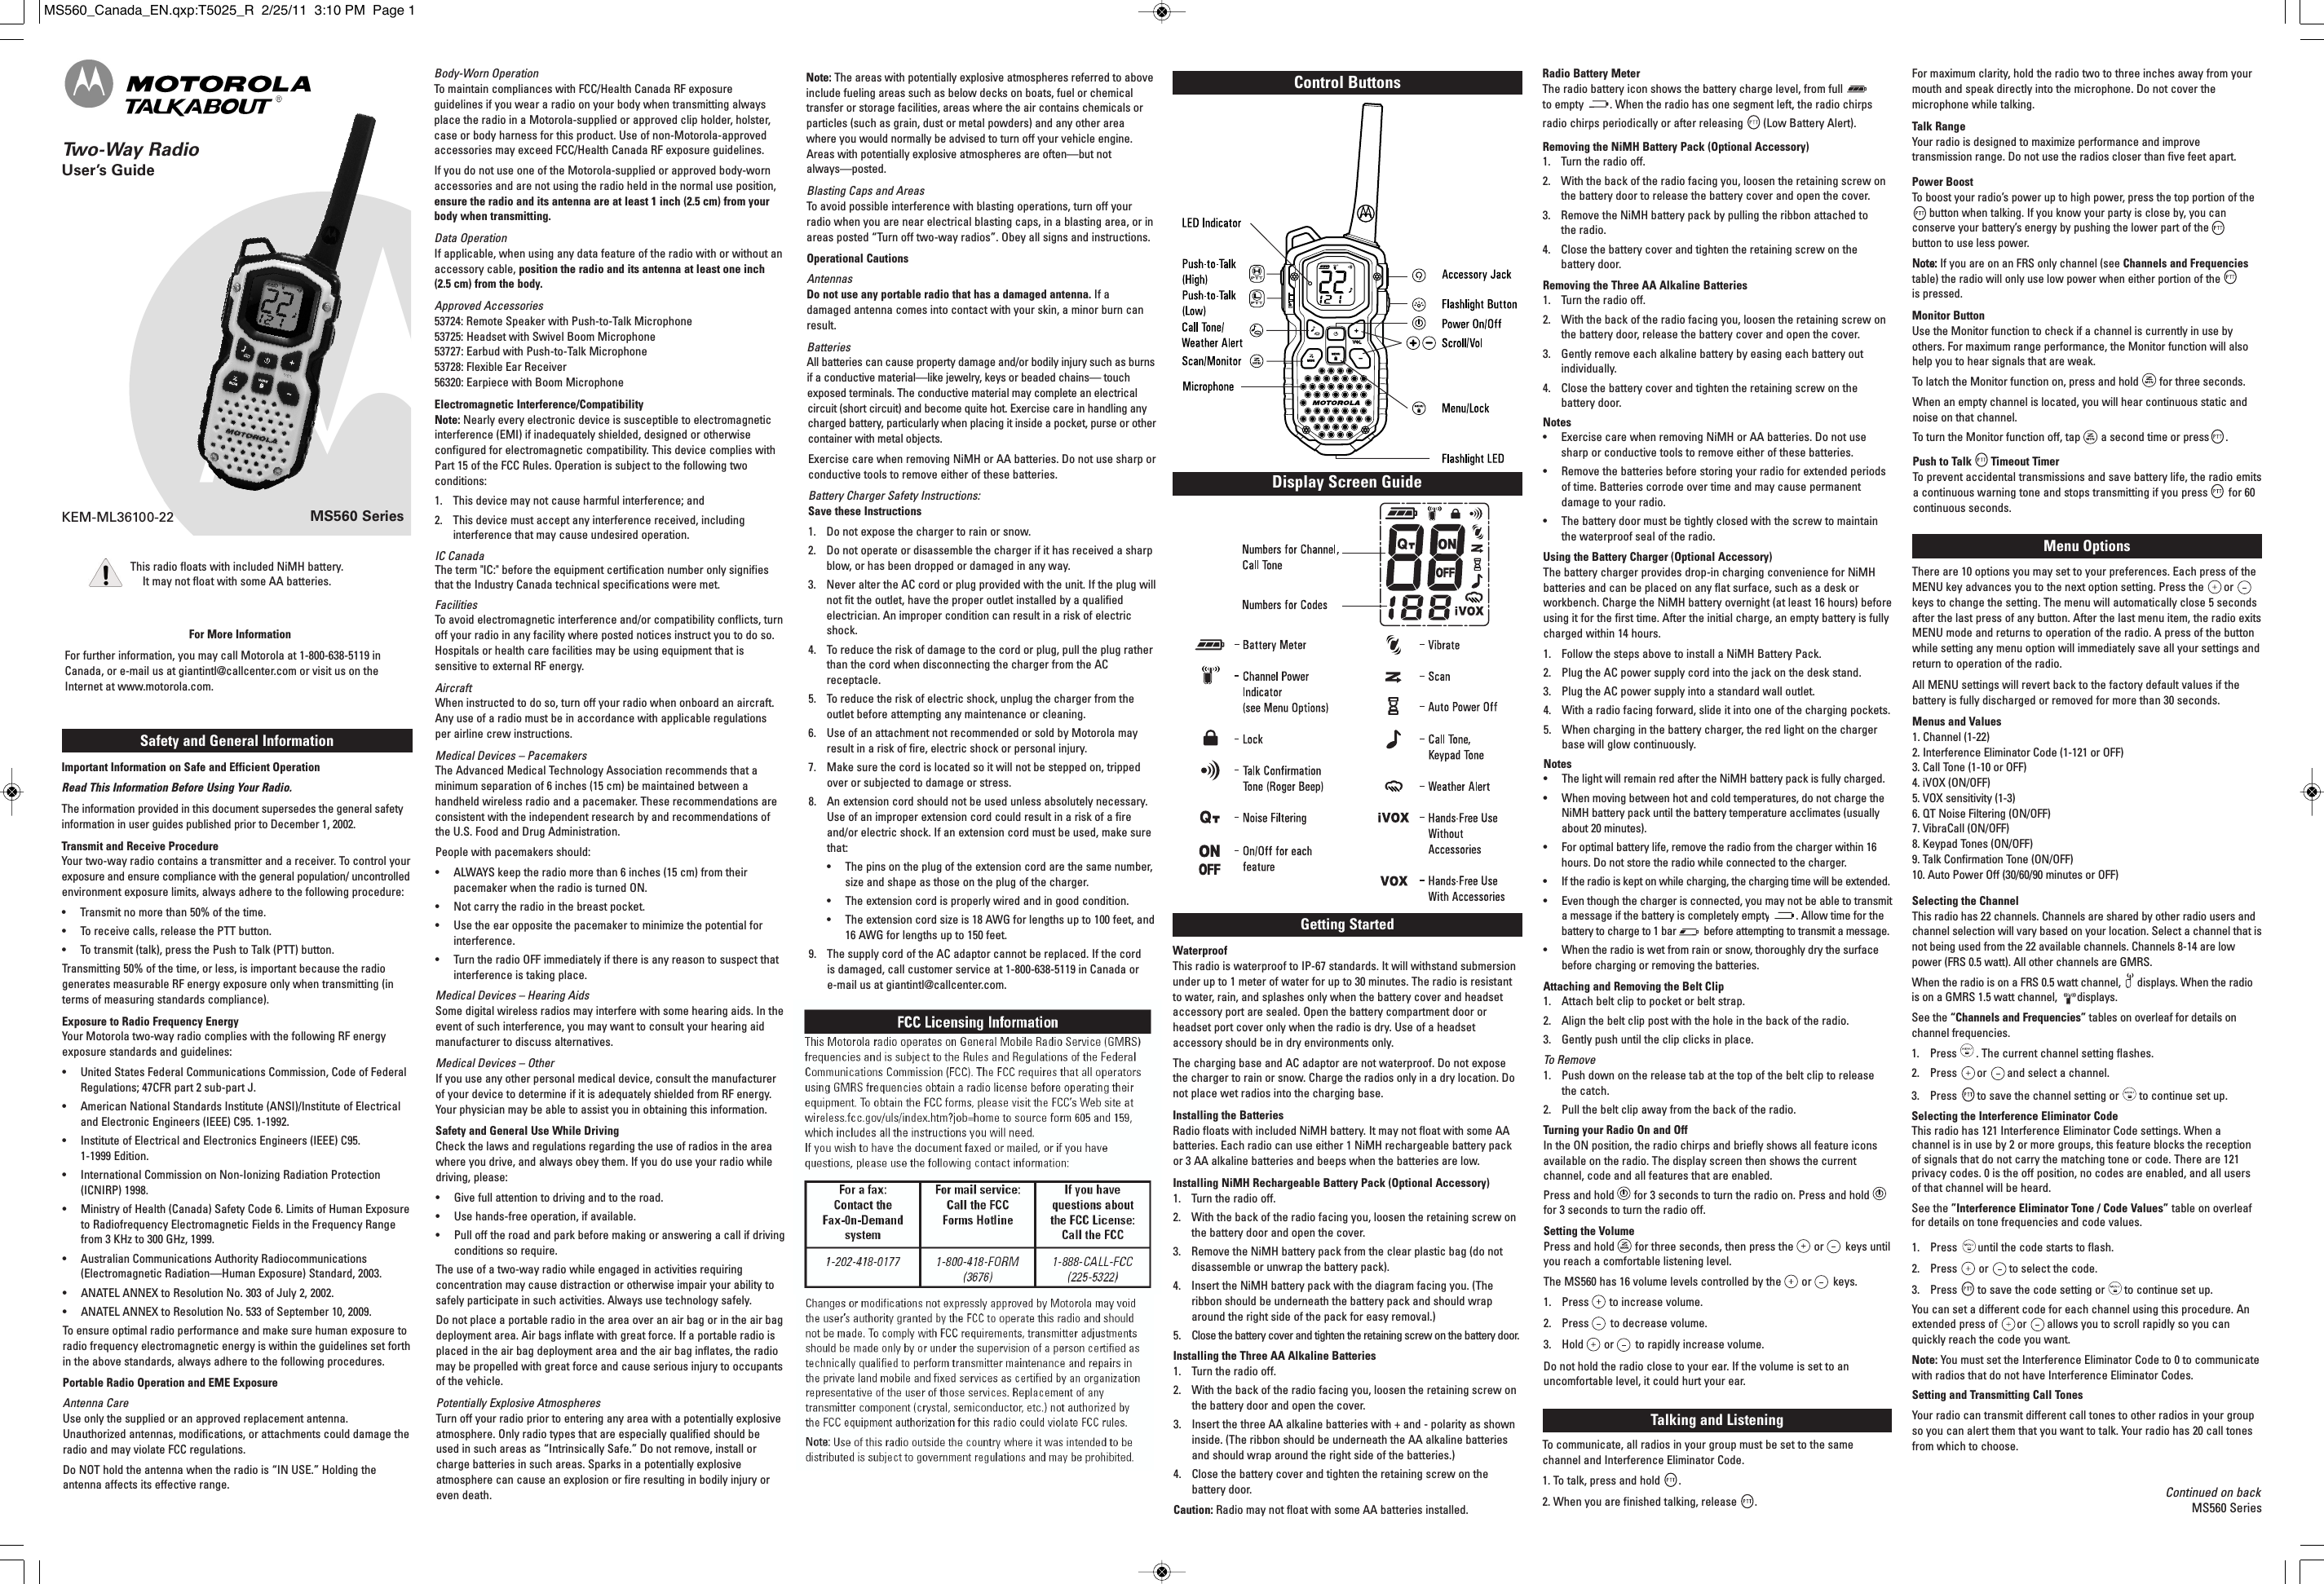 MS560 SeriesKEM-ML36100-22Safety and General InformationImportant Information on Safe and Efficient OperationRead This Information Before Using Your Radio.The information provided in this document supersedes the general safetyinformation in user guides published prior to December 1, 2002.Transmit and Receive ProcedureYour two-way radio contains a transmitter and a receiver. To control yourexposure and ensure compliance with the general population/ uncontrolledenvironment exposure limits, always adhere to the following procedure:• Transmit no more than 50% of the time.• To receive calls, release the PTT button.• To transmit (talk), press the Push to Talk (PTT) button.Transmitting 50% of the time, or less, is important because the radiogenerates measurable RF energy exposure only when transmitting (interms of measuring standards compliance).Exposure to Radio Frequency EnergyYour Motorola two-way radio complies with the following RF energyexposure standards and guidelines:•  United States Federal Communications Commission, Code of FederalRegulations; 47CFR part 2 sub-part J.•  American National Standards Institute (ANSI)/Institute of Electricaland Electronic Engineers (IEEE) C95. 1-1992.•  Institute of Electrical and Electronics Engineers (IEEE) C95.1-1999 Edition.•  International Commission on Non-Ionizing Radiation Protection(ICNIRP) 1998.•  Ministry of Health (Canada) Safety Code 6. Limits of Human Exposureto Radiofrequency Electromagnetic Fields in the Frequency Rangefrom 3 KHz to 300 GHz, 1999.•  Australian Communications Authority Radiocommunications(Electromagnetic Radiation—Human Exposure) Standard, 2003.•  ANATEL ANNEX to Resolution No. 303 of July 2, 2002.•  ANATEL ANNEX to Resolution No. 533 of September 10, 2009.To ensure optimal radio performance and make sure human exposure toradio frequency electromagnetic energy is within the guidelines set forthin the above standards, always adhere to the following procedures.Portable Radio Operation and EME ExposureAntenna CareUse only the supplied or an approved replacement antenna.Unauthorized antennas, modifications, or attachments could damage theradio and may violate FCC regulations.Do NOT hold the antenna when the radio is “IN USE.” Holding theantenna affects its effective range.Body-Worn OperationTo maintain compliances with FCC/Health Canada RF exposureguidelines if you wear a radio on your body when transmitting alwaysplace the radio in a Motorola-supplied or approved clip holder, holster,case or body harness for this product. Use of non-Motorola-approvedaccessories may exceed FCC/Health Canada RF exposure guidelines.If you do not use one of the Motorola-supplied or approved body-wornaccessories and are not using the radio held in the normal use position,ensure the radio and its antenna are at least 1 inch (2.5 cm) from yourbody when transmitting.Data OperationIf applicable, when using any data feature of the radio with or without anaccessory cable, position the radio and its antenna at least one inch(2.5 cm) from the body.Approved Accessories53724: Remote Speaker with Push-to-Talk Microphone53725: Headset with Swivel Boom Microphone53727: Earbud with Push-to-Talk Microphone53728: Flexible Ear Receiver56320: Earpiece with Boom MicrophoneElectromagnetic Interference/CompatibilityNote: Nearly every electronic device is susceptible to electromagneticinterference (EMI) if inadequately shielded, designed or otherwiseconfigured for electromagnetic compatibility. This device complies withPart 15 of the FCC Rules. Operation is subject to the following twoconditions:1. This device may not cause harmful interference; and2.  This device must accept any interference received, includinginterference that may cause undesired operation.IC CanadaThe term &quot;IC:&quot; before the equipment certification number only signifiesthat the Industry Canada technical specifications were met.FacilitiesTo avoid electromagnetic interference and/or compatibility conflicts, turnoff your radio in any facility where posted notices instruct you to do so.Hospitals or health care facilities may be using equipment that issensitive to external RF energy.AircraftWhen instructed to do so, turn off your radio when onboard an aircraft.Any use of a radio must be in accordance with applicable regulationsper airline crew instructions.Medical Devices – PacemakersThe Advanced Medical Technology Association recommends that aminimum separation of 6 inches (15 cm) be maintained between ahandheld wireless radio and a pacemaker. These recommendations areconsistent with the independent research by and recommendations ofthe U.S. Food and Drug Administration.People with pacemakers should:•  ALWAYS keep the radio more than 6 inches (15 cm) from theirpacemaker when the radio is turned ON.•  Not carry the radio in the breast pocket.•  Use the ear opposite the pacemaker to minimize the potential forinterference.•  Turn the radio OFF immediately if there is any reason to suspect thatinterference is taking place.Medical Devices – Hearing AidsSome digital wireless radios may interfere with some hearing aids. In theevent of such interference, you may want to consult your hearing aidmanufacturer to discuss alternatives.Medical Devices – OtherIf you use any other personal medical device, consult the manufacturerof your device to determine if it is adequately shielded from RF energy.Your physician may be able to assist you in obtaining this information.Safety and General Use While DrivingCheck the laws and regulations regarding the use of radios in the areawhere you drive, and always obey them. If you do use your radio whiledriving, please:•  Give full attention to driving and to the road.•  Use hands-free operation, if available.•  Pull off the road and park before making or answering a call if drivingconditions so require.The use of a two-way radio while engaged in activities requiringconcentration may cause distraction or otherwise impair your ability tosafely participate in such activities. Always use technology safely.Do not place a portable radio in the area over an air bag or in the air bagdeployment area. Air bags inflate with great force. If a portable radio isplaced in the air bag deployment area and the air bag inflates, the radiomay be propelled with great force and cause serious injury to occupantsof the vehicle.Potentially Explosive AtmospheresTurn off your radio prior to entering any area with a potentially explosiveatmosphere. Only radio types that are especially qualified should beused in such areas as “Intrinsically Safe.” Do not remove, install orcharge batteries in such areas. Sparks in a potentially explosiveatmosphere can cause an explosion or fire resulting in bodily injury oreven death.For More InformationFor further information, you may call Motorola at 1-800-638-5119 inCanada, or e-mail us at giantintl@callcenter.com or visit us on theInternet at www.motorola.com.Note: The areas with potentially explosive atmospheres referred to aboveinclude fueling areas such as below decks on boats, fuel or chemicaltransfer or storage facilities, areas where the air contains chemicals orparticles (such as grain, dust or metal powders) and any other areawhere you would normally be advised to turn off your vehicle engine.Areas with potentially explosive atmospheres are often—but notalways—posted.Blasting Caps and AreasTo avoid possible interference with blasting operations, turn off yourradio when you are near electrical blasting caps, in a blasting area, or inareas posted “Turn off two-way radios”. Obey all signs and instructions.Operational CautionsAntennasDo not use any portable radio that has a damaged antenna. If adamaged antenna comes into contact with your skin, a minor burn canresult.BatteriesAll batteries can cause property damage and/or bodily injury such as burnsif a conductive material—like jewelry, keys or beaded chains— touchexposed terminals. The conductive material may complete an electricalcircuit (short circuit) and become quite hot. Exercise care in handling anycharged battery, particularly when placing it inside a pocket, purse or othercontainer with metal objects.Exercise care when removing NiMH or AA batteries. Do not use sharp orconductive tools to remove either of these batteries.Battery Charger Safety Instructions:Save these Instructions1.  Do not expose the charger to rain or snow.2.  Do not operate or disassemble the charger if it has received a sharpblow, or has been dropped or damaged in any way.3.  Never alter the AC cord or plug provided with the unit. If the plug willnot fit the outlet, have the proper outlet installed by a qualifiedelectrician. An improper condition can result in a risk of electricshock.4.  To reduce the risk of damage to the cord or plug, pull the plug ratherthan the cord when disconnecting the charger from the ACreceptacle.5.  To reduce the risk of electric shock, unplug the charger from theoutlet before attempting any maintenance or cleaning.6.  Use of an attachment not recommended or sold by Motorola mayresult in a risk of fire, electric shock or personal injury.7.  Make sure the cord is located so it will not be stepped on, trippedover or subjected to damage or stress.8.  An extension cord should not be used unless absolutely necessary.Use of an improper extension cord could result in a risk of a fireand/or electric shock. If an extension cord must be used, make surethat:•  The pins   on the plug of the extension cord are the same number,size and shape as those on the plug of the charger.•  The extension cord is properly wired and in good condition.•  The extension cord size is 18 AWG for lengths up to 100 feet, and16 AWG for lengths up to 150 feet.9.  The supply cord of the AC adaptor cannot be replaced. If the cord is damaged, call customer service at 1-800-638-5119 in Canada or e-mail us at giantintl@callcenter.com.Licensing InformationYour Motorola radio operates on FRS &amp; GMRS frequencies and inCanada is subject to the rules &amp; regulations of Industry Canada (IC). ICrequires no license when operated in Canada. In the USA, use of GMRSfrequencies requires a radio license from the FCC before use.Changes or modifications not expressly approved by Motorola may voidthe user’s authority granted by the IC/FCC to operate this radio andshould not be made. To comply with IC/FCC requirements, transmitteradjustments should be made only by or under the supervision of aperson certified as technically qualified to perform transmittermaintenance and repairs in the private land mobile and fixed services ascertified by an organization representative of the user of those services.Replacement of any transmitter component (crystal, semiconductor, etc.)not authorized by the IC/FCC equipment authorization for this radio couldviolate IC/FCC rules.Note: Use of this radio outside the country where it was intended to bedistributed is subject to government regulations and may be prohibited.®Radio Battery MeterThe radio battery icon shows the battery charge level, from full to empty . When the radio has one segment left, the radio chirps radio chirps periodically or after releasing (Low Battery Alert).Removing the NiMH Battery Pack (Optional Accessory)1. Turn the radio off.2. With the back of the radio facing you, loosen the retaining screw onthe battery door to release the battery cover and open the cover.3. Remove the NiMH battery pack by pulling the ribbon attached to the radio.4. Close the battery cover and tighten the retaining screw on thebattery door.Removing the Three AA Alkaline Batteries1.  Turn the radio off.2.  With the back of the radio facing you, loosen the retaining screw onthe battery door, release the battery cover and open the cover.3.  Gently remove each alkaline battery by easing each battery outindividually.4.  Close the battery cover and tighten the retaining screw on thebattery door.Notes• Exercise care when removing NiMH or AA batteries. Do not usesharp or conductive tools to remove either of these batteries.•  Remove the batteries before storing your radio for extended periodsof time. Batteries corrode over time and may cause permanentdamage to your radio.•  The battery door must be tightly closed with the screw to maintainthe waterproof seal of the radio.Using the Battery Charger (Optional Accessory)The battery charger provides drop-in charging convenience for NiMHbatteries and can be placed on any flat surface, such as a desk orworkbench. Charge the NiMH battery overnight (at least 16 hours) beforeusing it for the first time. After the initial charge, an empty battery is fullycharged within 14 hours.1.  Follow the steps above to install a NiMH Battery Pack.2.  Plug the AC power supply cord into the jack on the desk stand.3.  Plug the AC power supply into a standard wall outlet.4.  With a radio facing forward, slide it into one of the charging pockets.5.  When charging in the battery charger, the red light on the chargerbase will glow continuously.Notes• The light will remain red after the NiMH battery pack is fully charged.•  When moving between hot and cold temperatures, do not charge theNiMH battery pack until the battery temperature acclimates (usuallyabout 20 minutes).•  For optimal battery life, remove the radio from the charger within 16hours. Do not store the radio while connected to the charger.•  If the radio is kept on while charging, the charging time will be extended.•  Even though the charger is connected, you may not be able to transmita message if the battery is completely empty . Allow time for thebattery to charge to 1 bar before attempting to transmit a message.•  When the radio is wet from rain or snow, thoroughly dry the surfacebefore charging or removing the batteries.Attaching and Removing the Belt Clip1.  Attach belt clip to pocket or belt strap.2.  Align the belt clip post with the hole in the back of the radio.3.  Gently push until the clip clicks in place.To Remove1.  Push down on the release tab at the top of the belt clip to release the catch.2.  Pull the belt clip away from the back of the radio.Turning your Radio On and OffIn the ON position, the radio chirps and briefly shows all feature iconsavailable on the radio. The display screen then shows the currentchannel, code and all features that are enabled.Press and hold for 3 seconds to turn the radio on. Press and holdfor 3 seconds to turn the radio off.Setting the VolumePress and hold for three seconds, then press the or keys untilyou reach a comfortable listening level.The MS560 has 16 volume levels controlled by the or keys.1.  Press to increase volume.2. Press to decrease volume.3.  Hold or to rapidly increase volume.Do not hold the radio close to your ear. If the volume is set to anuncomfortable level, it could hurt your ear.Talking and ListeningTo communicate, all radios in your group must be set to the samechannel and Interference Eliminator Code.1. To talk, press and hold .2. When you are finished talking, release .                                                    For maximum clarity, hold the radio two to three inches away from yourmouth and speak directly into the microphone. Do not cover themicrophone while talking.Talk RangeYour radio is designed to maximize performance and improvetransmission range. Do not use the radios closer than five feet apart.Power BoostTo boost your radio’s power up to high power, press the top portion of thebutton when talking. If you know your party is close by, you canconserve your battery’s energy by pushing the lower part of thebutton to use less power.Note: If you are on an FRS only channel (see Channels and Frequenciestable) the radio will only use low power when either portion of theis pressed.Monitor ButtonUse the Monitor function to check if a channel is currently in use byothers. For maximum range performance, the Monitor function will alsohelp you to hear signals that are weak.To latch the Monitor function on, press and hold for three seconds.  When an empty channel is located, you will hear continuous static andnoise on that channel.To turn the Monitor function off, tap a second time or press .Push to Talk Timeout TimerTo prevent accidental transmissions and save battery life, the radio emitsa continuous warning tone and stops transmitting if you press for 60continuous seconds.Menu OptionsThere are 10 options you may set to your preferences. Each press of theMENU key advances you to the next option setting. Press the orkeys to change the setting. The menu will automatically close 5 secondsafter the last press of any button. After the last menu item, the radio exitsMENU mode and returns to operation of the radio. A press of the buttonwhile setting any menu option will immediately save all your settings andreturn to operation of the radio.All MENU settings will revert back to the factory default values if thebattery is fully discharged or removed for more than 30 seconds.Menus and Values1. Channel (1-22)2. Interference Eliminator Code (1-121 or OFF)3. Call Tone (1-10 or OFF)4. iVOX (ON/OFF)5. VOX sensitivity (1-3)6. QT Noise Filtering (ON/OFF)7. VibraCall (ON/OFF)8. Keypad Tones (ON/OFF)9. Talk Confirmation Tone (ON/OFF)10. Auto Power Off (30/60/90 minutes or OFF)Selecting the ChannelThis radio has 22 channels. Channels are shared by other radio users andchannel selection will vary based on your location. Select a channel that isnot being used from the 22 available channels. Channels 8-14 are lowpower (FRS 0.5 watt). All other channels are GMRS.When the radio is on a FRS 0.5 watt channel, displays. When the radiois on a GMRS 1.5 watt channel,       displays. See the “Channels and Frequencies” tables on overleaf for details onchannel frequencies.1.  Press . The current channel setting flashes. 2.  Press or and select a channel.3.  Press to save the channel setting or to continue set up.Selecting the Interference Eliminator CodeThis radio has 121 Interference Eliminator Code settings. When achannel is in use by 2 or more groups, this feature blocks the receptionof signals that do not carry the matching tone or code. There are 121privacy codes. 0 is the off position, no codes are enabled, and all usersof that channel will be heard.  See the ”Interference Eliminator Tone / Code Values” table on overleaffor details on tone frequencies and code values.1.  Press until the code starts to flash.2.  Press or to select the code.3. Press to save the code setting or to continue set up.You can set a different code for each channel using this procedure. Anextended press of or allows you to scroll rapidly so you canquickly reach the code you want.Note: You must set the Interference Eliminator Code to 0 to communicatewith radios that do not have Interference Eliminator Codes.Setting and Transmitting Call TonesYour radio can transmit different call tones to other radios in your groupso you can alert them that you want to talk. Your radio has 20 call tonesfrom which to choose. Display Screen GuideContinued on backMS560 SeriesControl ButtonsGetting StartedWaterproofThis radio is waterproof to IP-67 standards. It will withstand submersionunder up to 1 meter of water for up to 30 minutes. The radio is resistantto water, rain, and splashes only when the battery cover and headsetaccessory port are sealed. Open the battery compartment door orheadset port cover only when the radio is dry. Use of a headsetaccessory should be in dry environments only.The charging base and AC adaptor are not waterproof. Do not exposethe charger to rain or snow. Charge the radios only in a dry location. Donot place wet radios into the charging base.Installing the BatteriesRadio floats with included NiMH battery. It may not float with some AAbatteries. Each radio can use either 1 NiMH rechargeable battery packor 3 AA alkaline batteries and beeps when the batteries are low.Installing NiMH Rechargeable Battery Pack (Optional Accessory)1.  Turn the radio off.2.  With the back of the radio facing you, loosen the retaining screw onthe battery door and open the cover.3.  Remove the NiMH battery pack from the clear plastic bag (do notdisassemble or unwrap the battery pack).4.  Insert the NiMH battery pack with the diagram facing you. (Theribbon should be underneath the battery pack and should wraparound the right side of the pack for easy removal.)5.  Close the battery cover and tighten the retaining screw on the battery door.Installing the Three AA Alkaline Batteries1. Turn the radio off.2.  With the back of the radio facing you, loosen the retaining screw onthe battery door and open the cover.3.  Insert the three AA alkaline batteries with + and - polarity as showninside. (The ribbon should be underneath the AA alkaline batteriesand should wrap around the right side of the batteries.)4.  Close the battery cover and tighten the retaining screw on thebattery door. Caution: Radio may not float with some AA batteries installed.Two-Way RadioUser’s Guide Date : Jan 14, 2011Model : MS350RDescription : Line Arts for User GuideControl Buttons Display Screen GuideDate : Sept 15, 2010Model : MS350RDescription : Line Arts for User GuideThis radio floats with included NiMH battery. It may not float with some AA batteries.MS560_Canada_EN.qxp:T5025_R  2/25/11  3:10 PM  Page 1